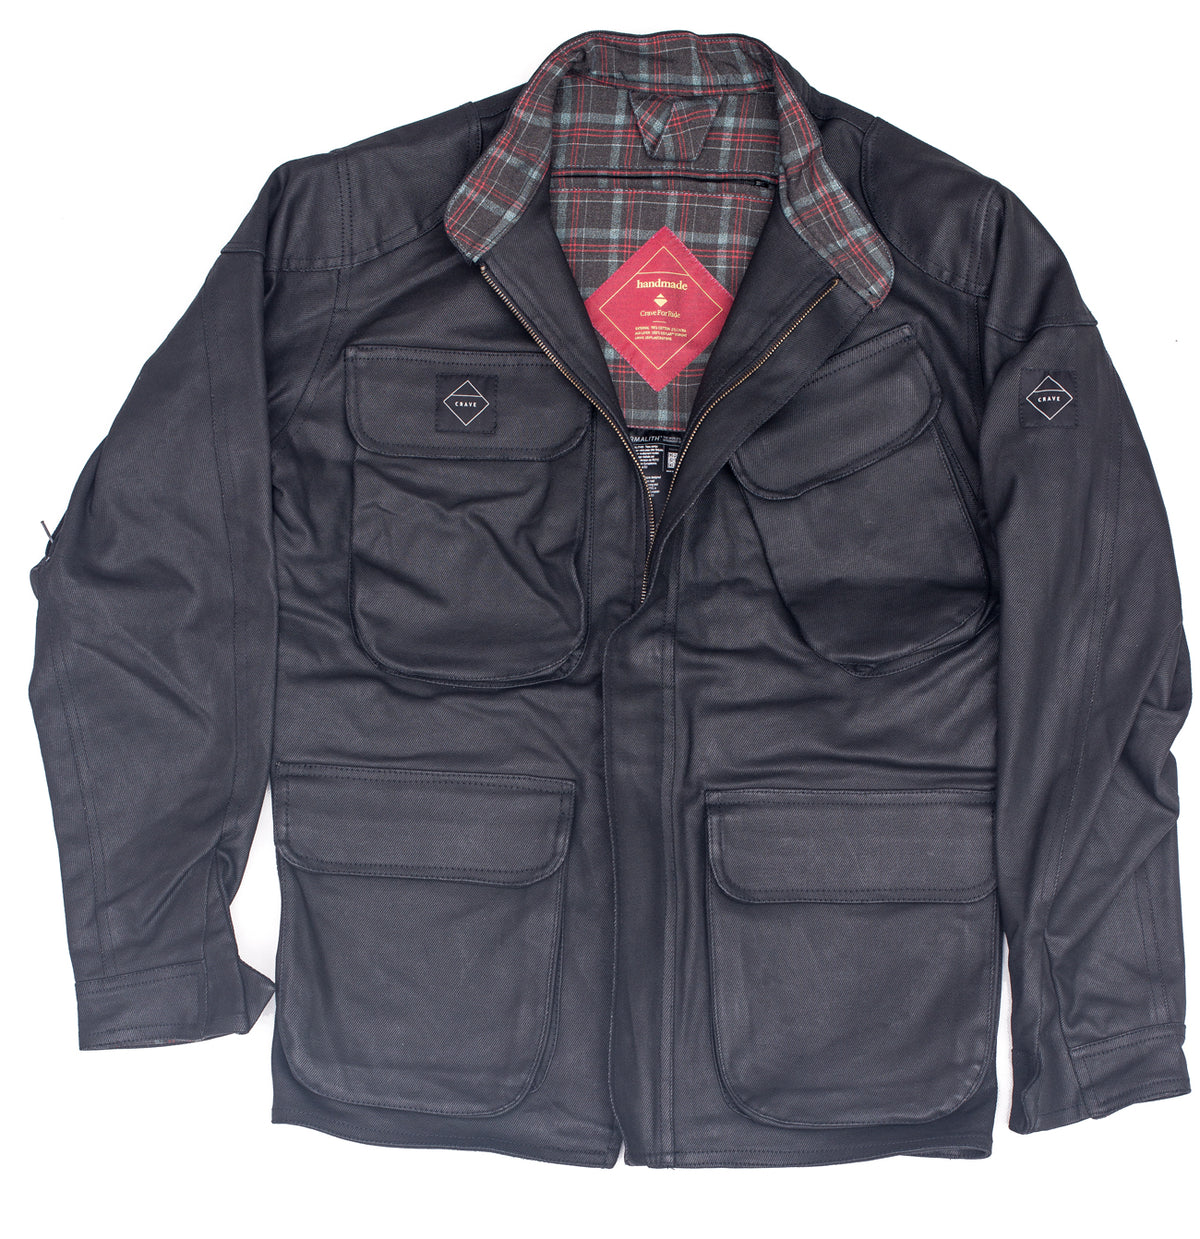 Waxed TROPHY Jacket - Armalith Armour Motorcycle Jacket